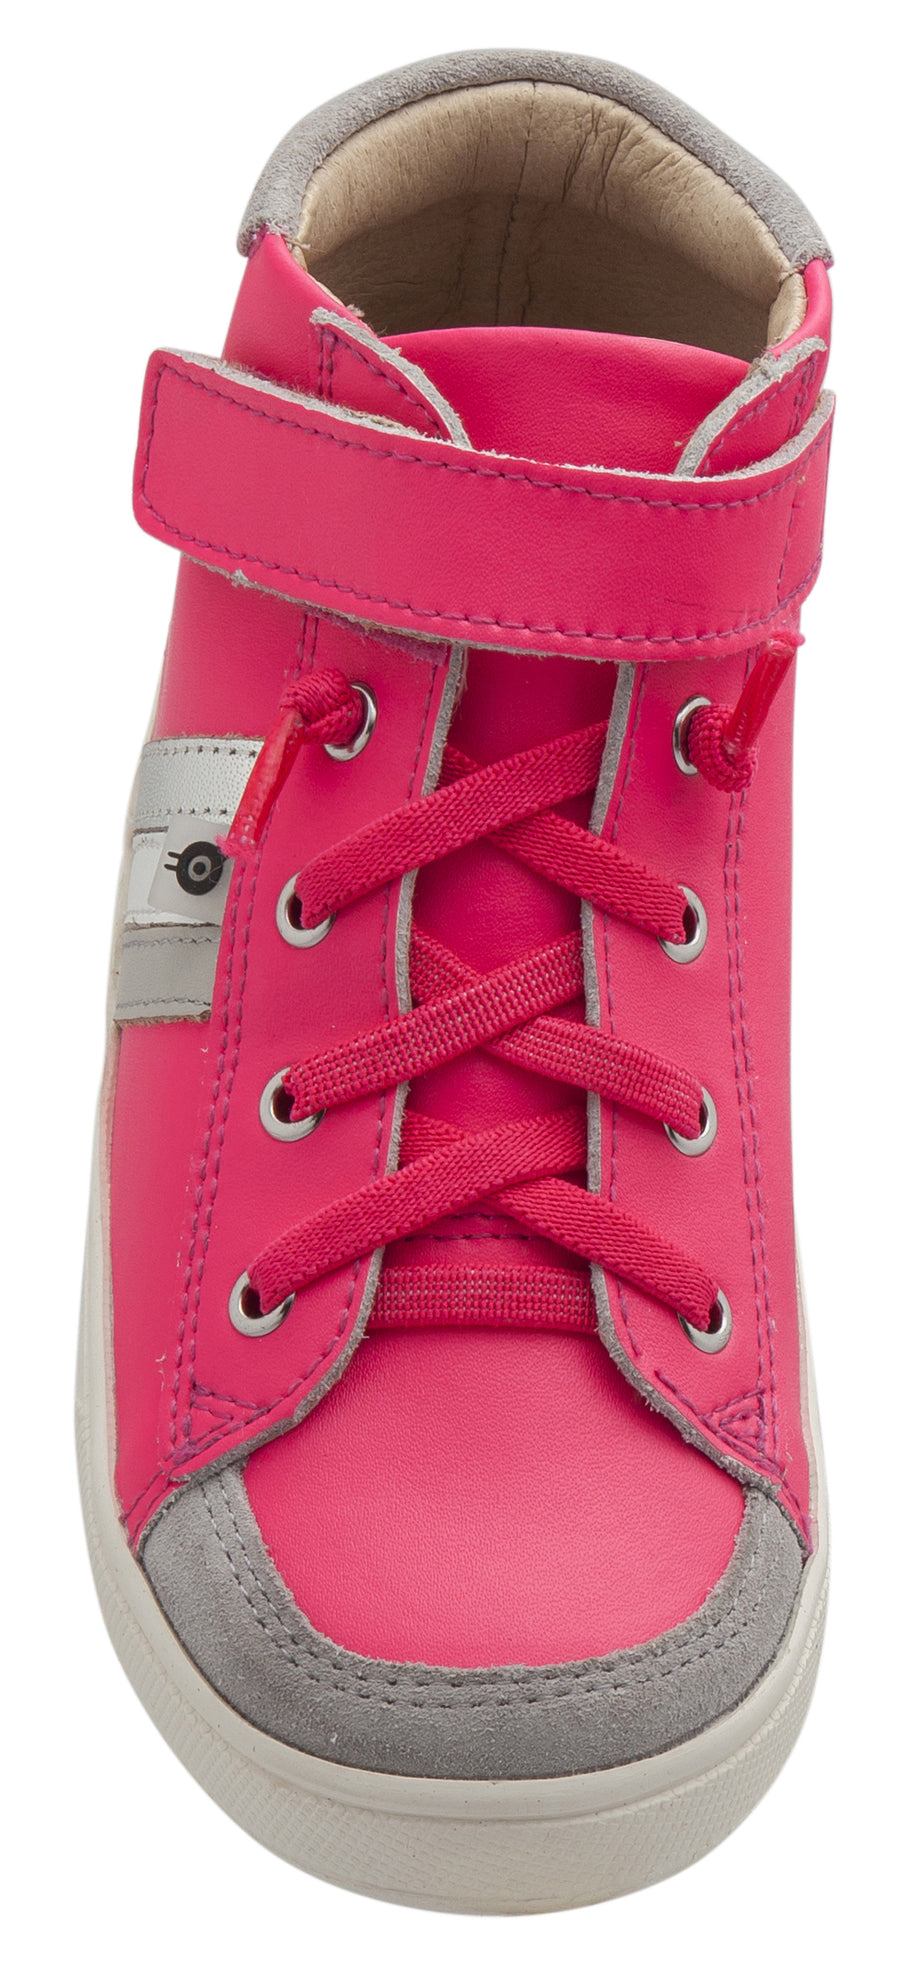 Old Soles Girl's Glambo High Top Leather Sneakers, Neon Pink/Gris/Snow/Silver